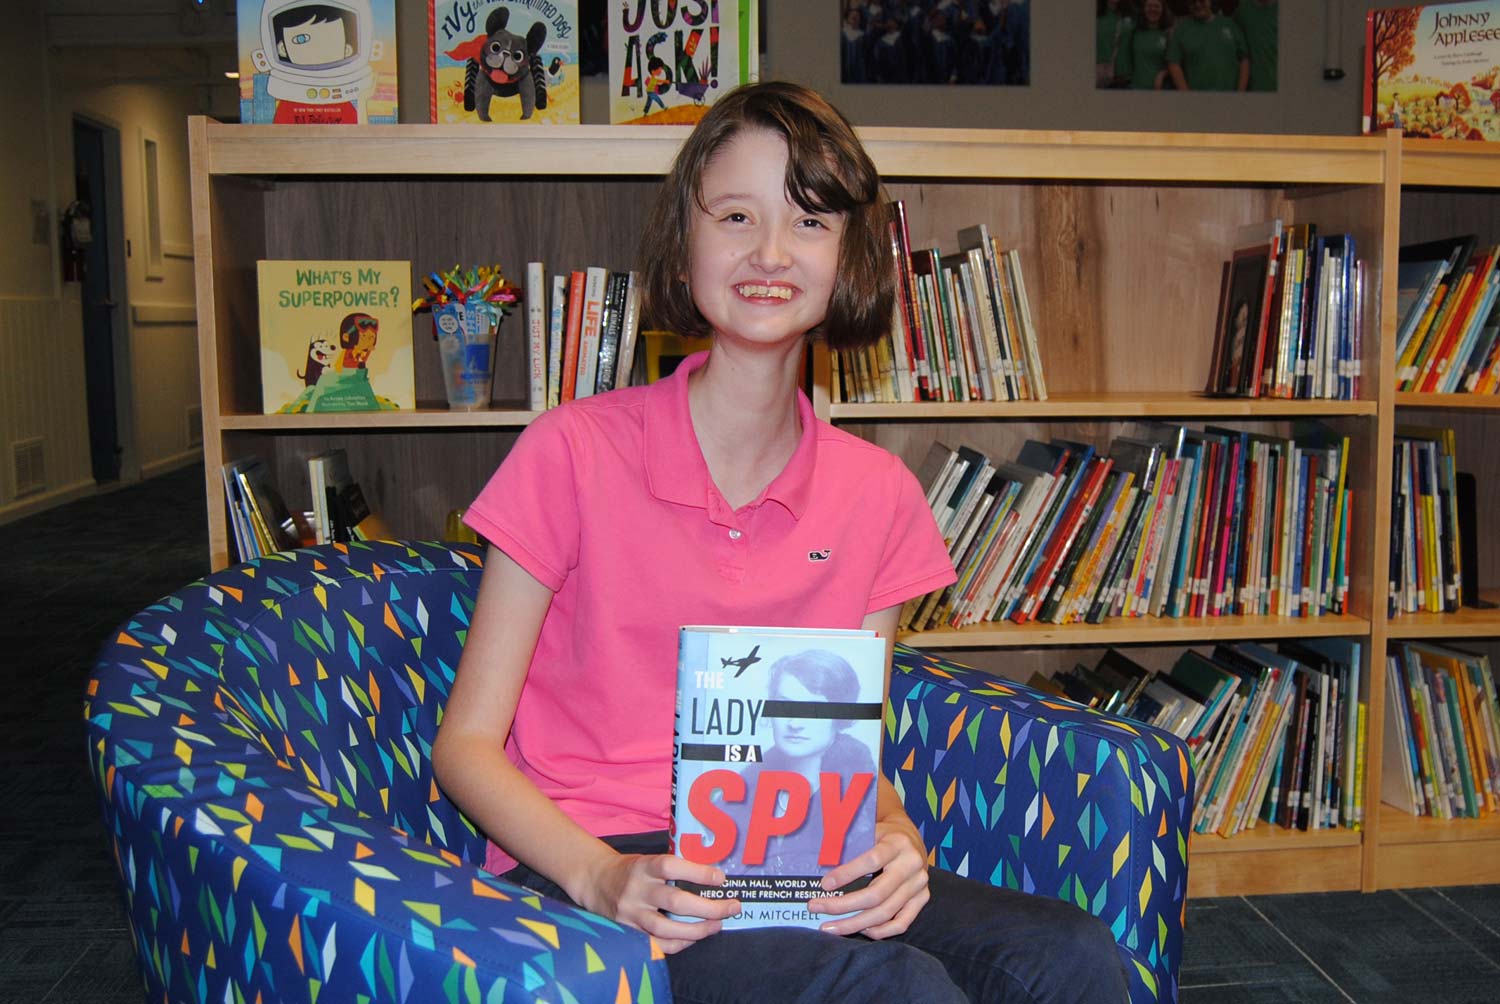 "I started this library to help every person feel important"—Brennan, Northstar Academy Discovering Abilities Library— insidewink.com